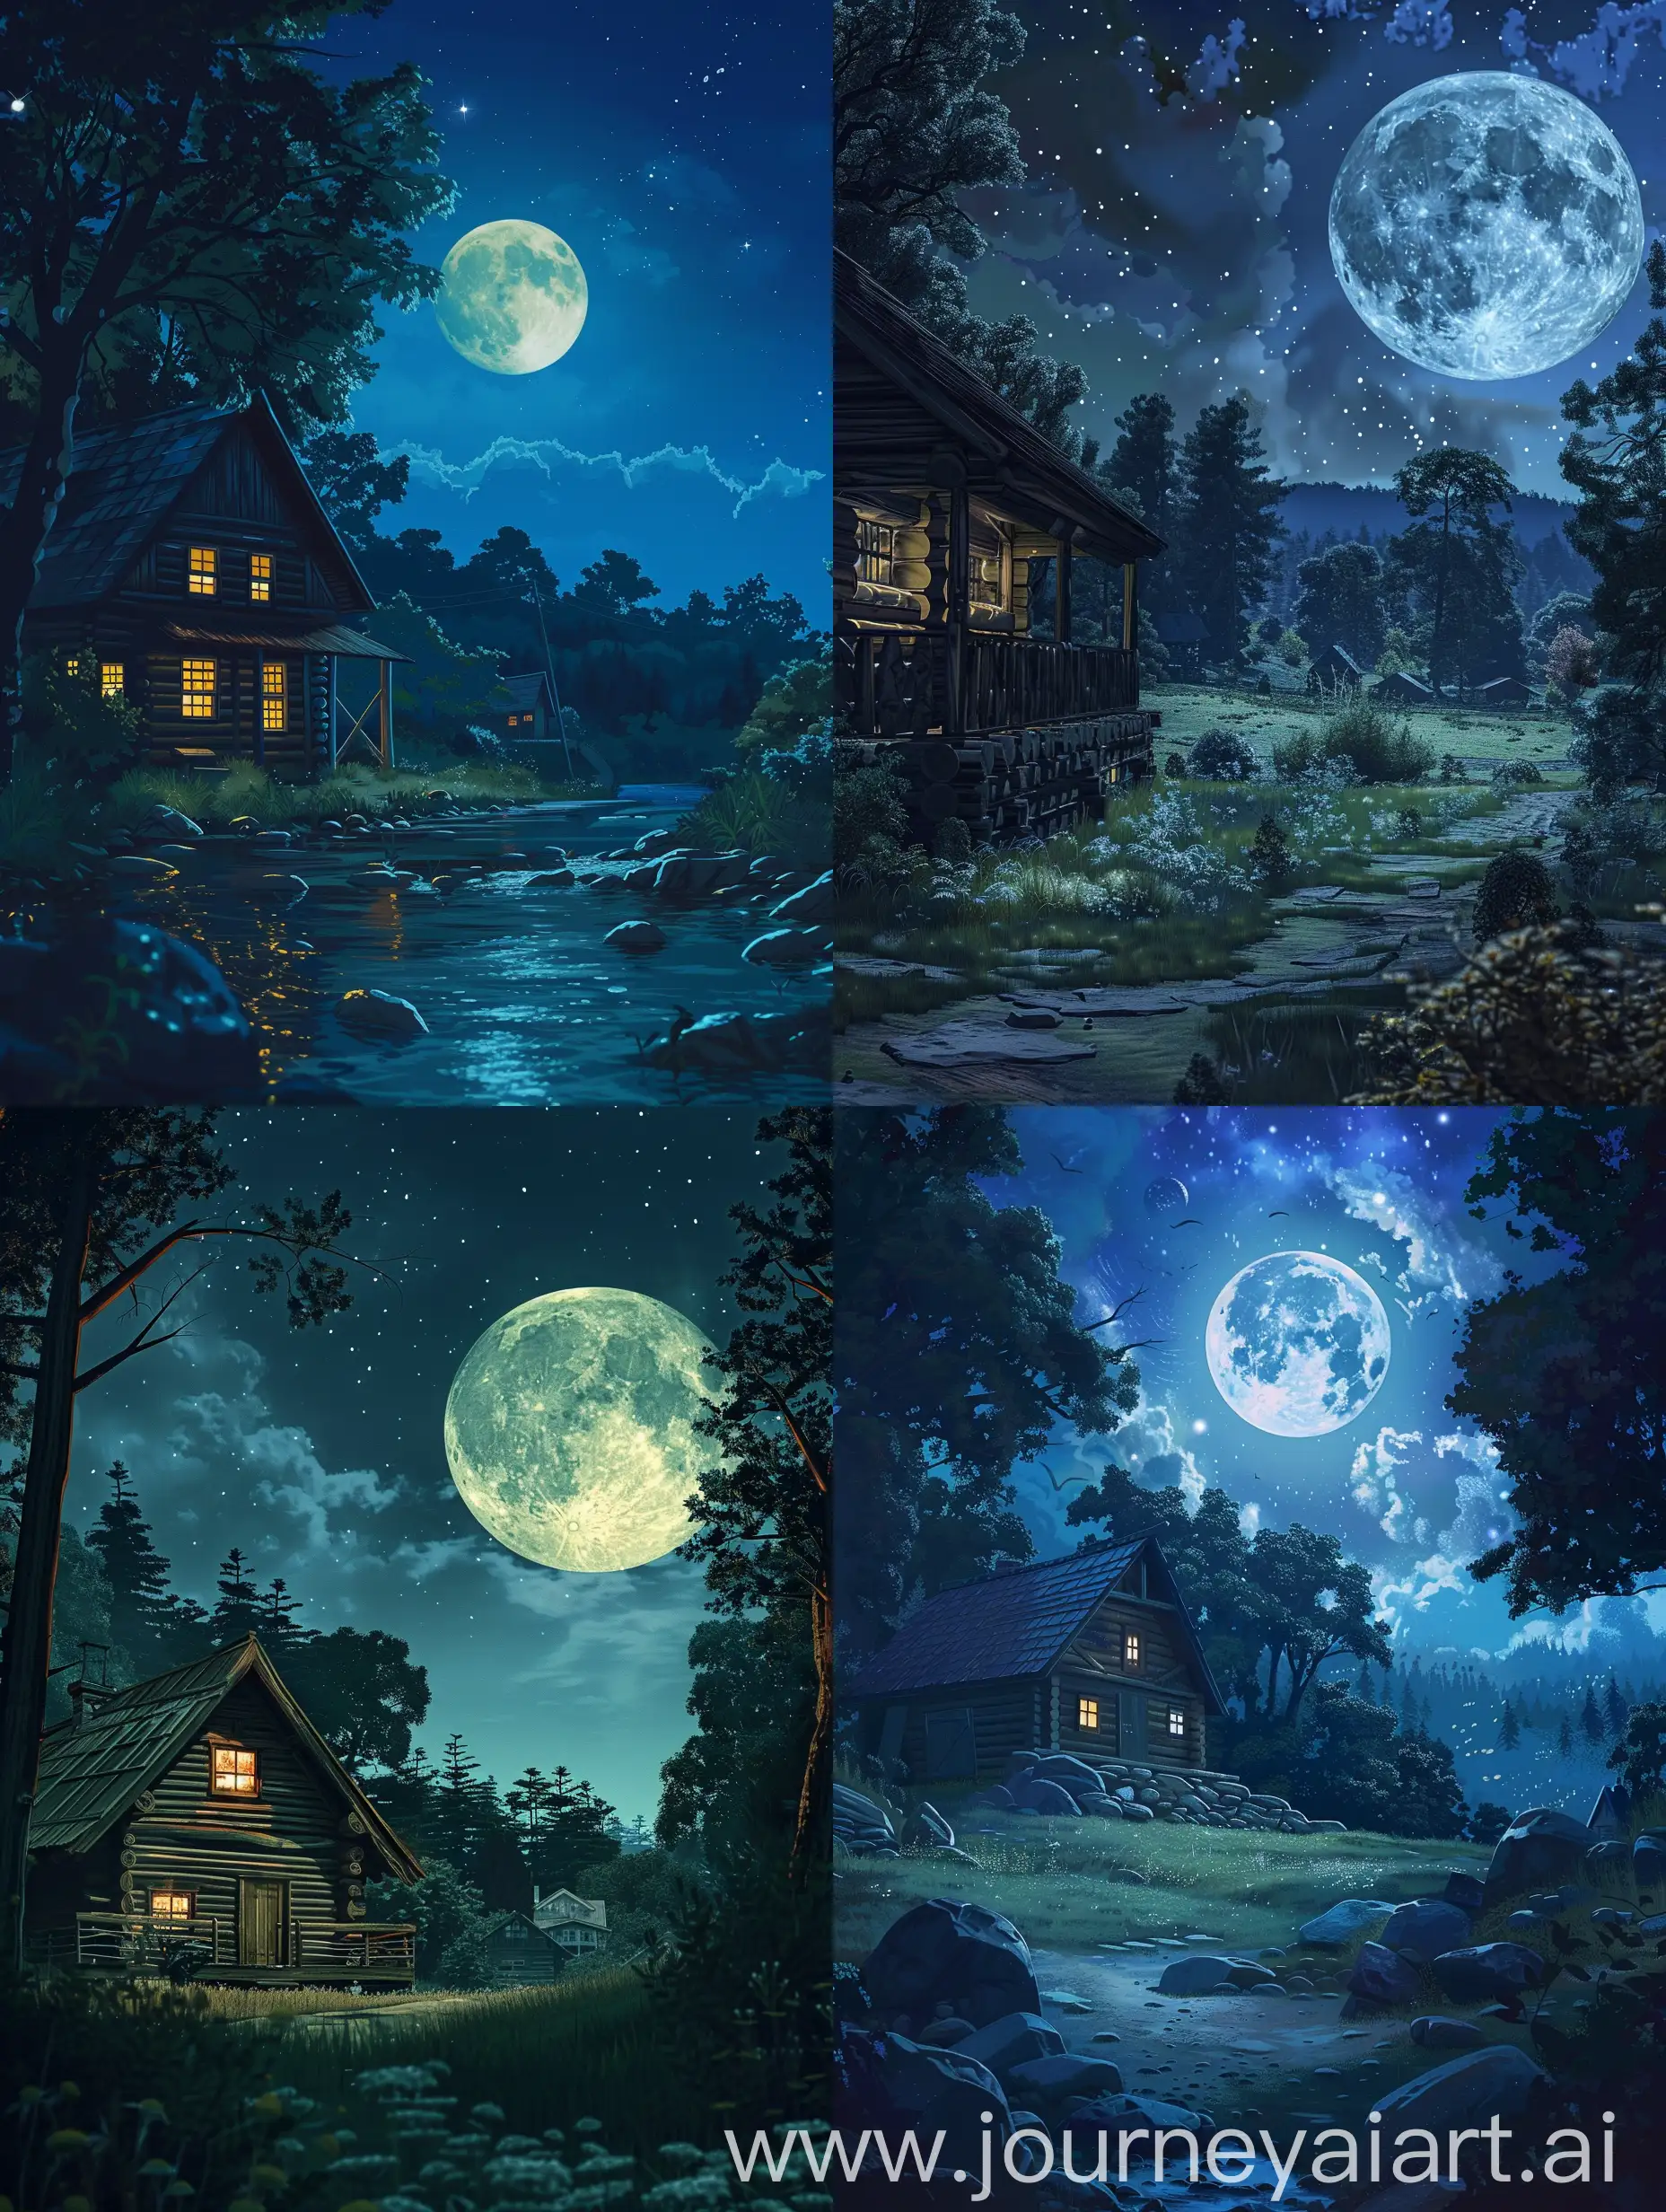 night scene of a cabin in the woods with a full moon, beautiful moonlight night, night scenery, moonlit night dreamy atmosphere, calm night. digital illustration, moonlit night, nighttime nature landscape, anime background art, beautiful wallpaper, at night with full moon, night time moonlight, at night with moon light, dreamy night, nightime village background, 